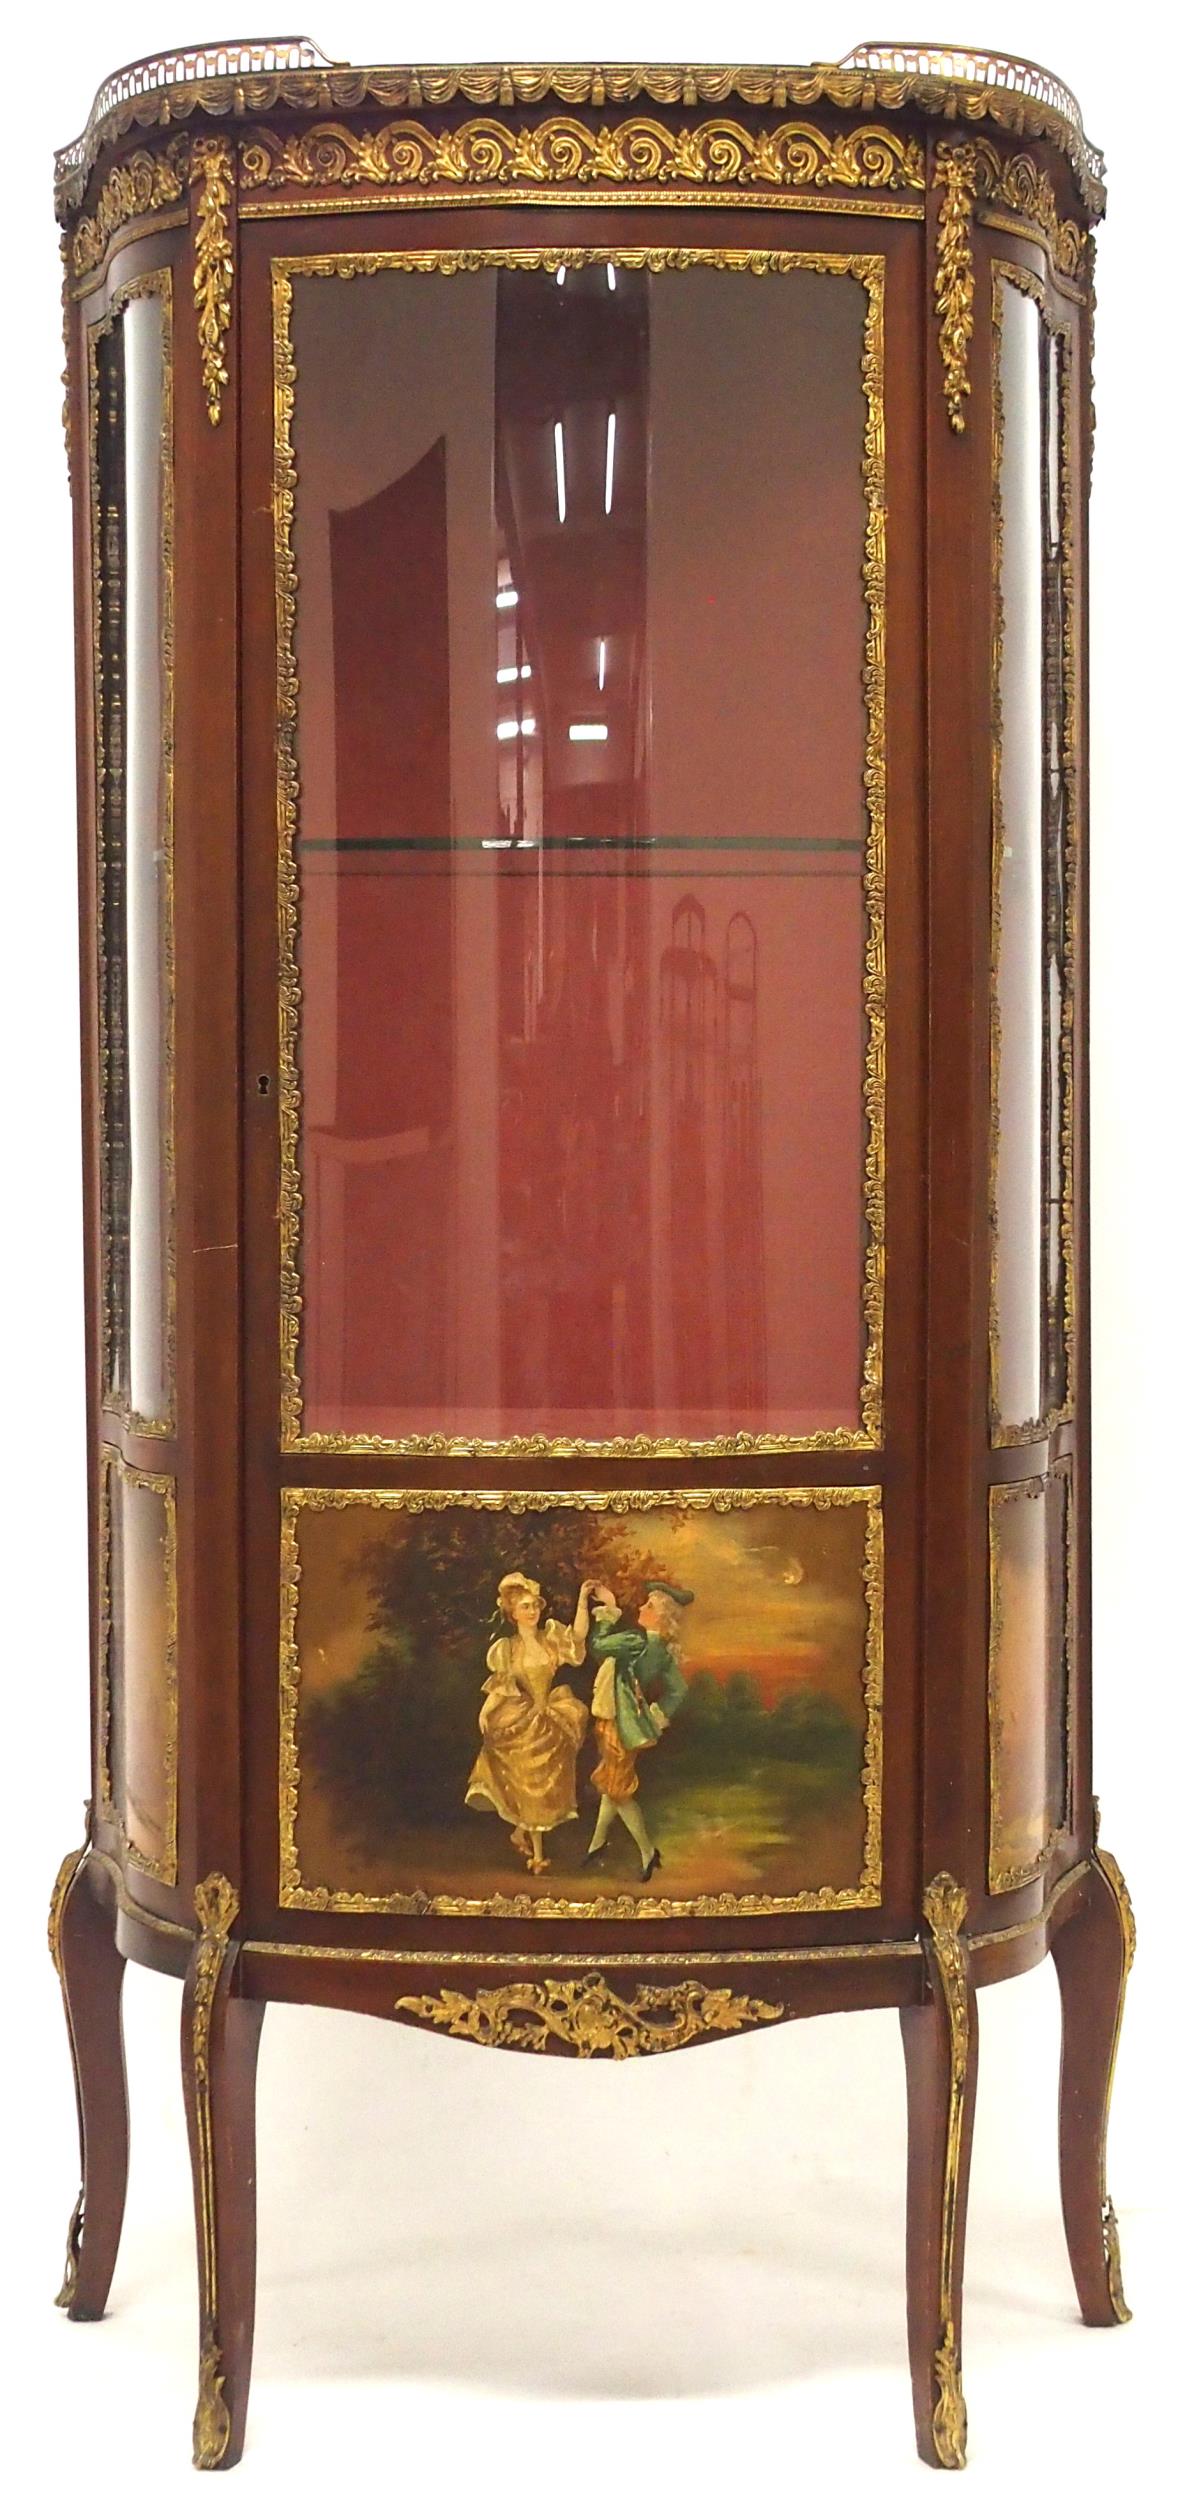 AN EARLY 20TH CENTURY LOUIS XV STYLE BRASS ORMOLU MOUNTED VITRINE DISPLAY CABINET  with galleried